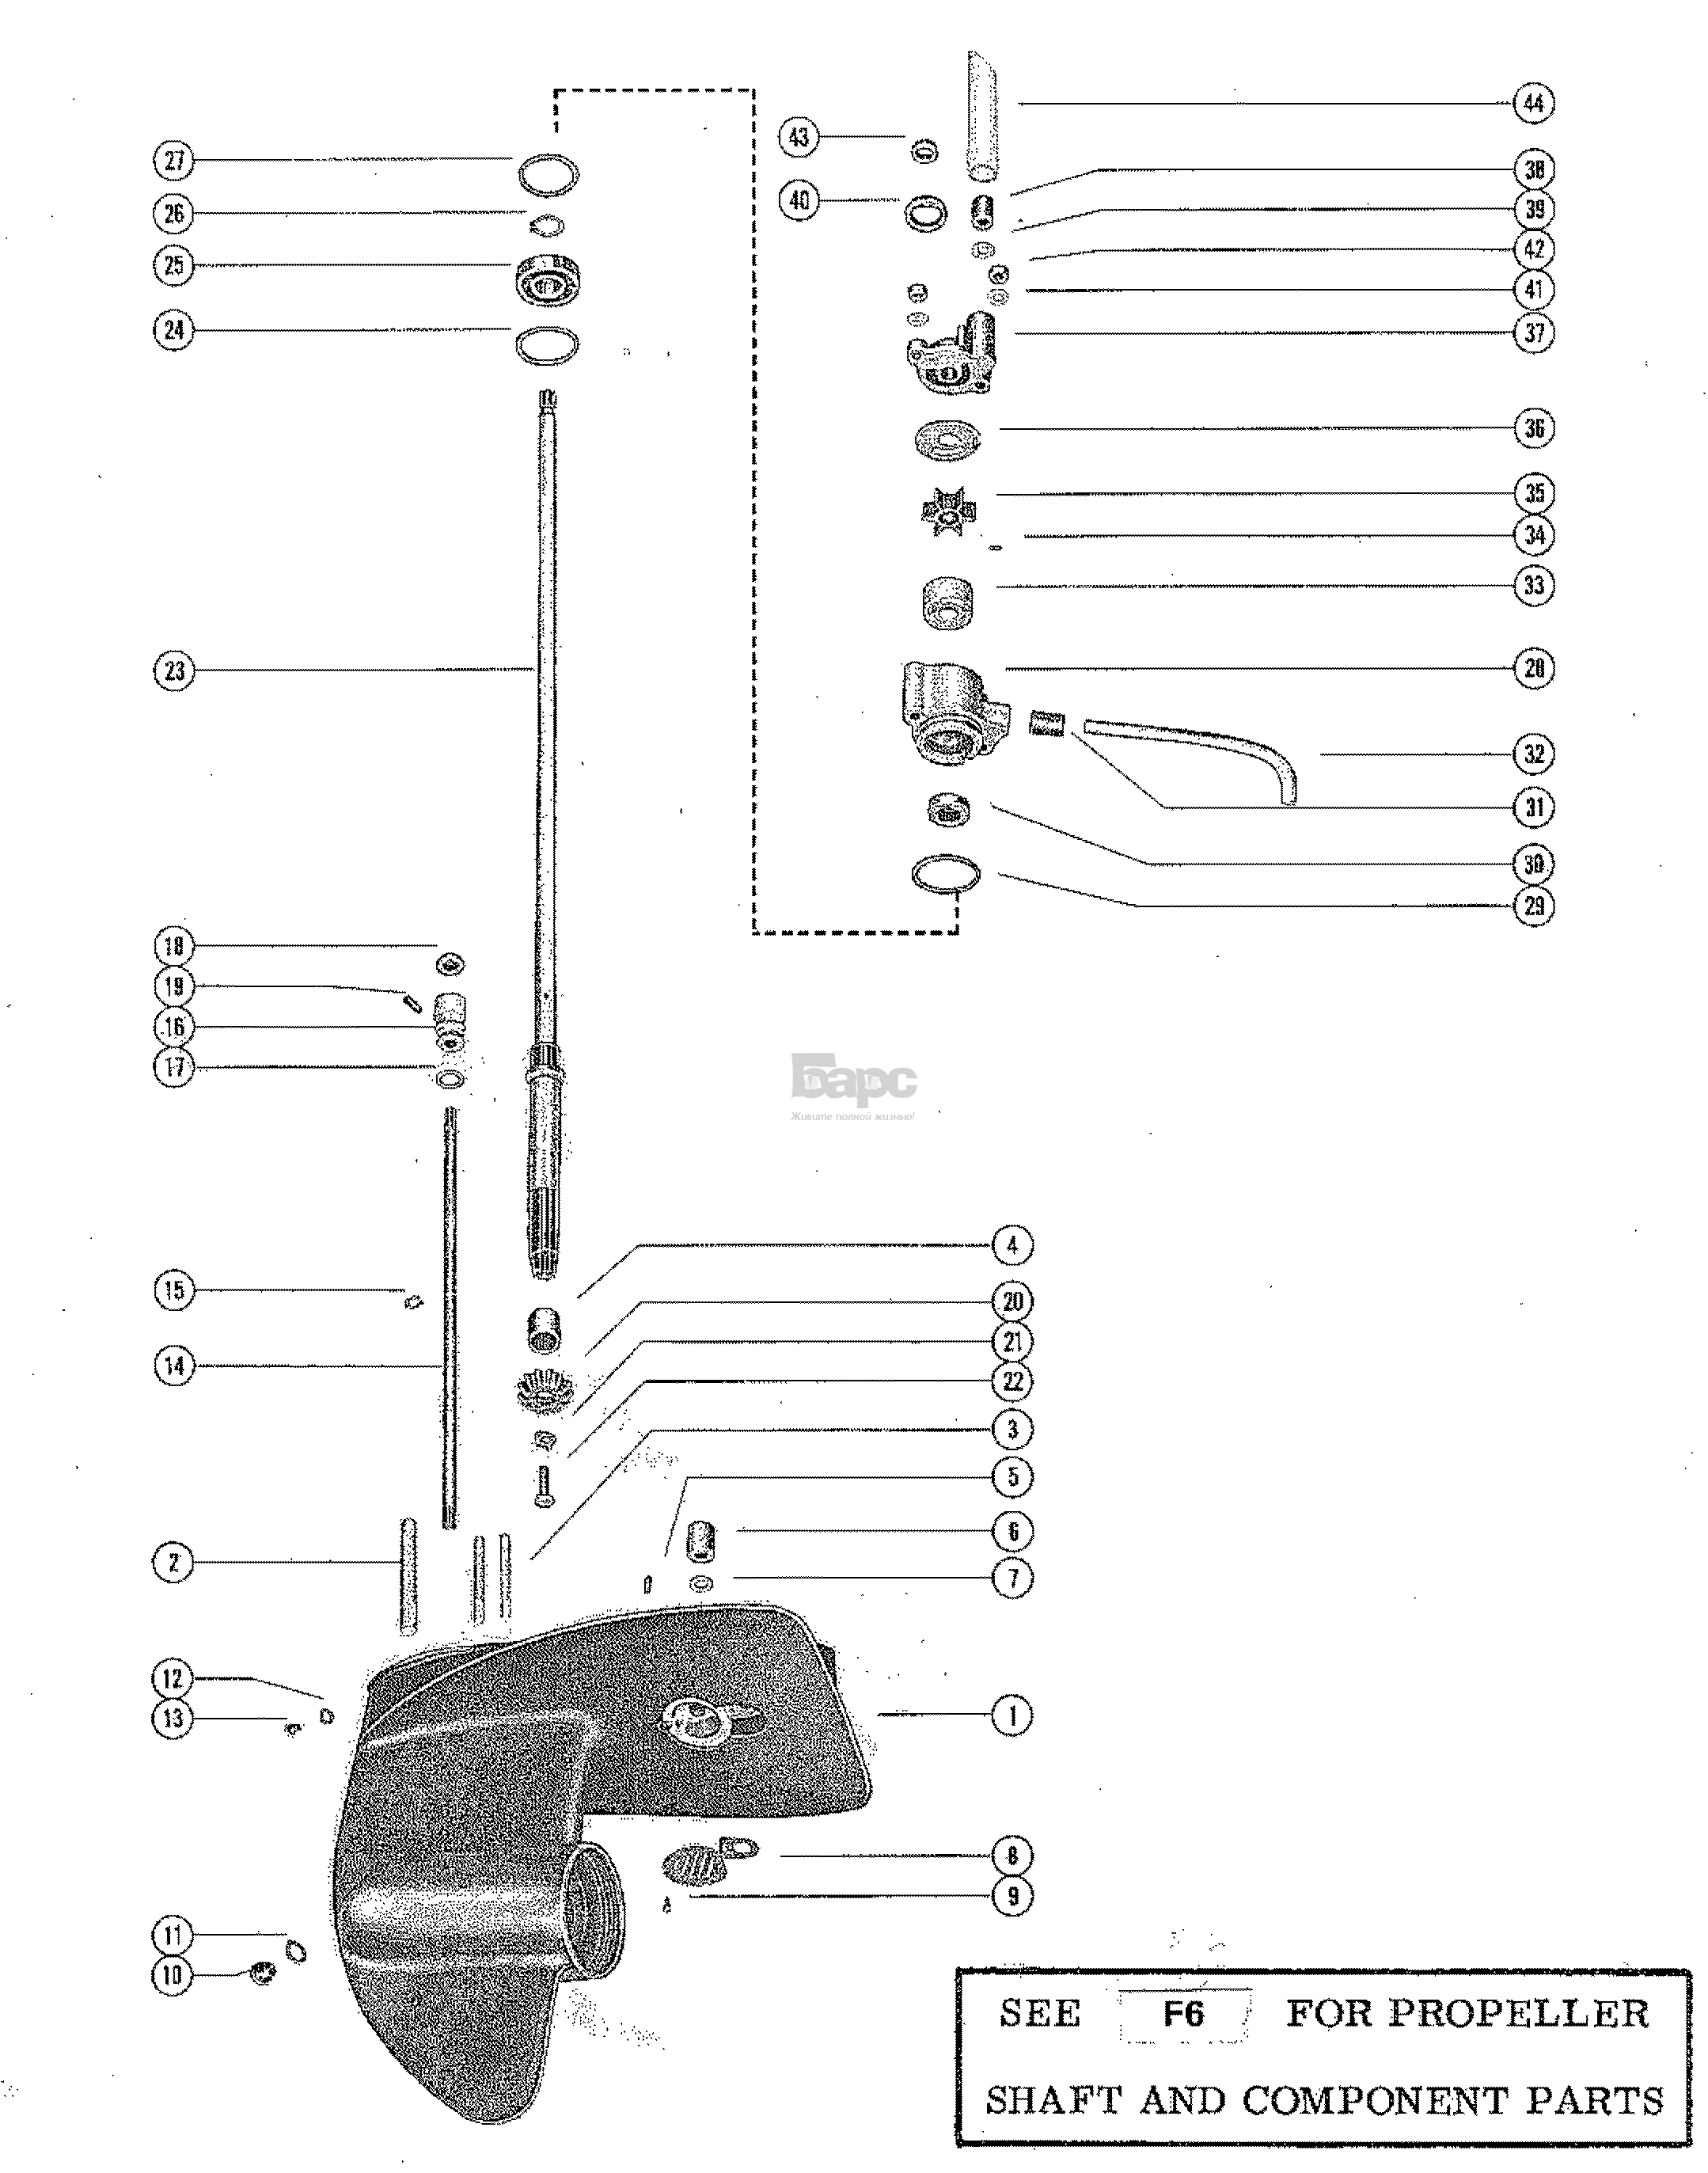 GEAR HOUSING ASSEMBLY, COMPLETE (PAGE 1)